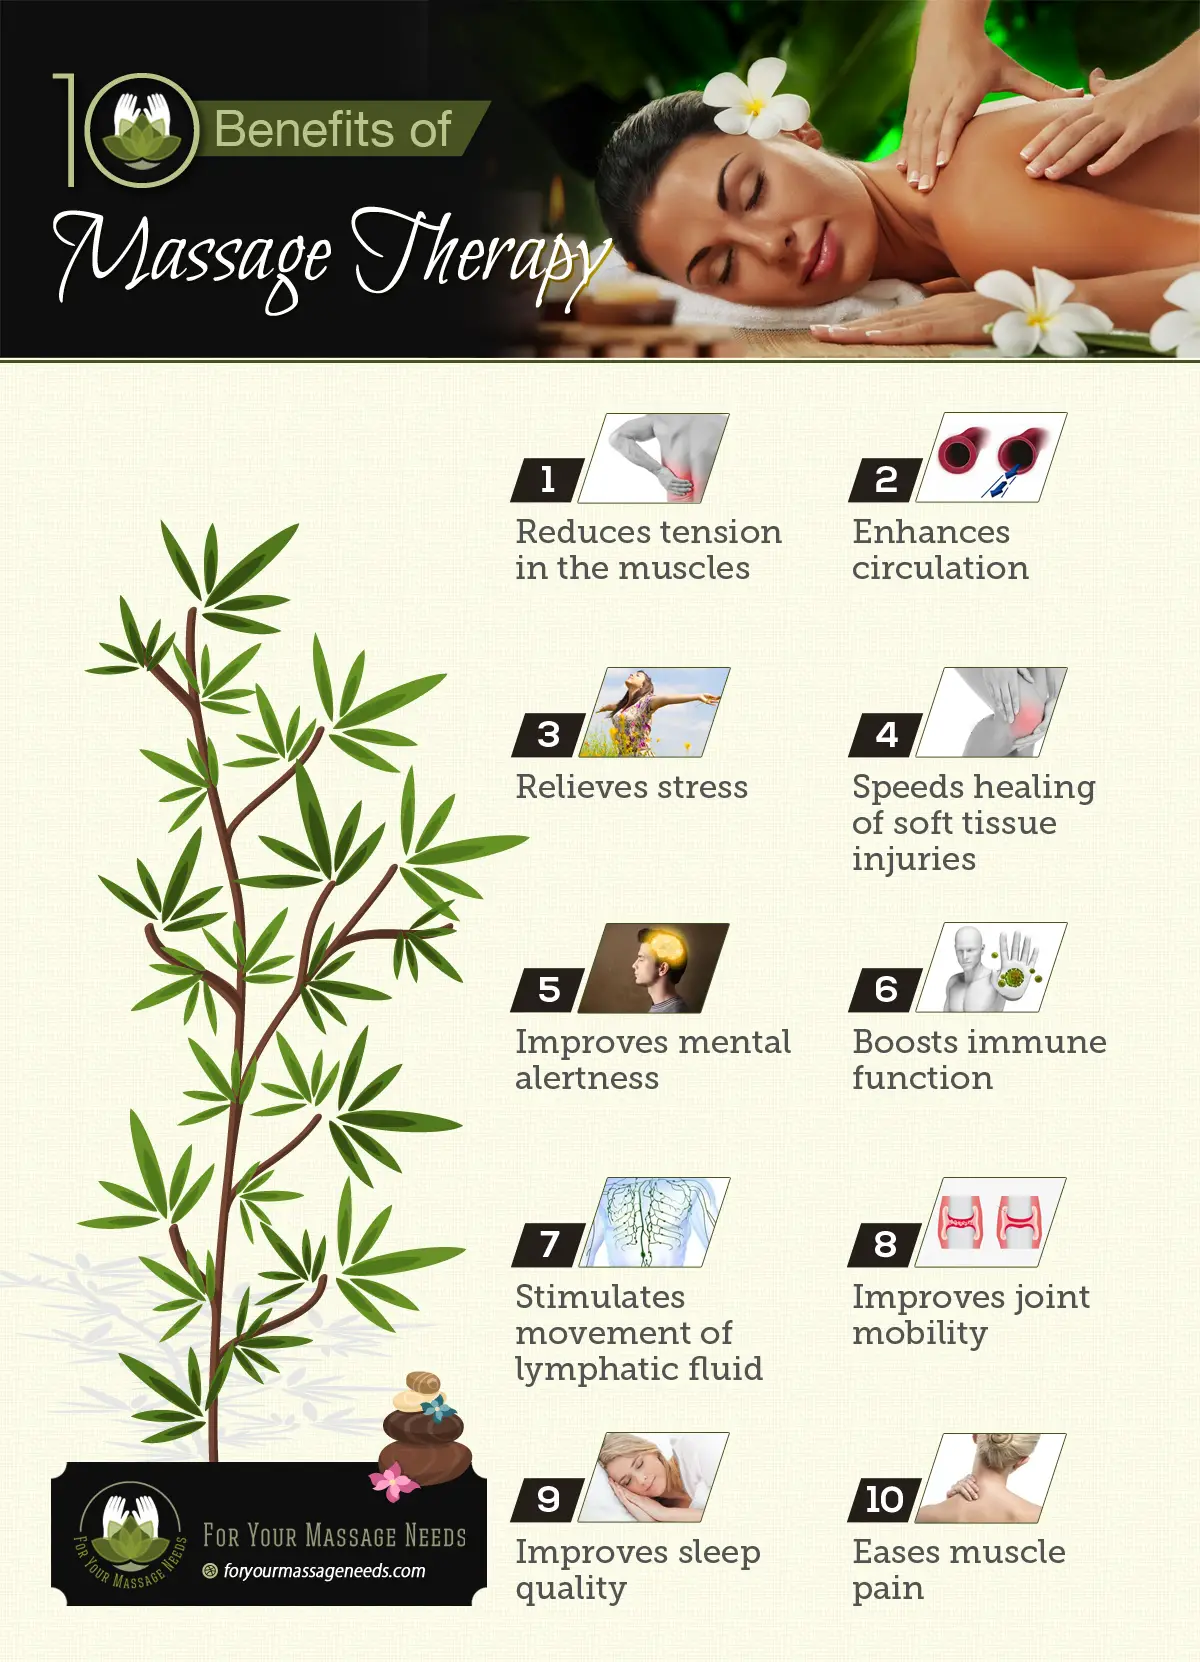 10 benefits of Massage Therapy